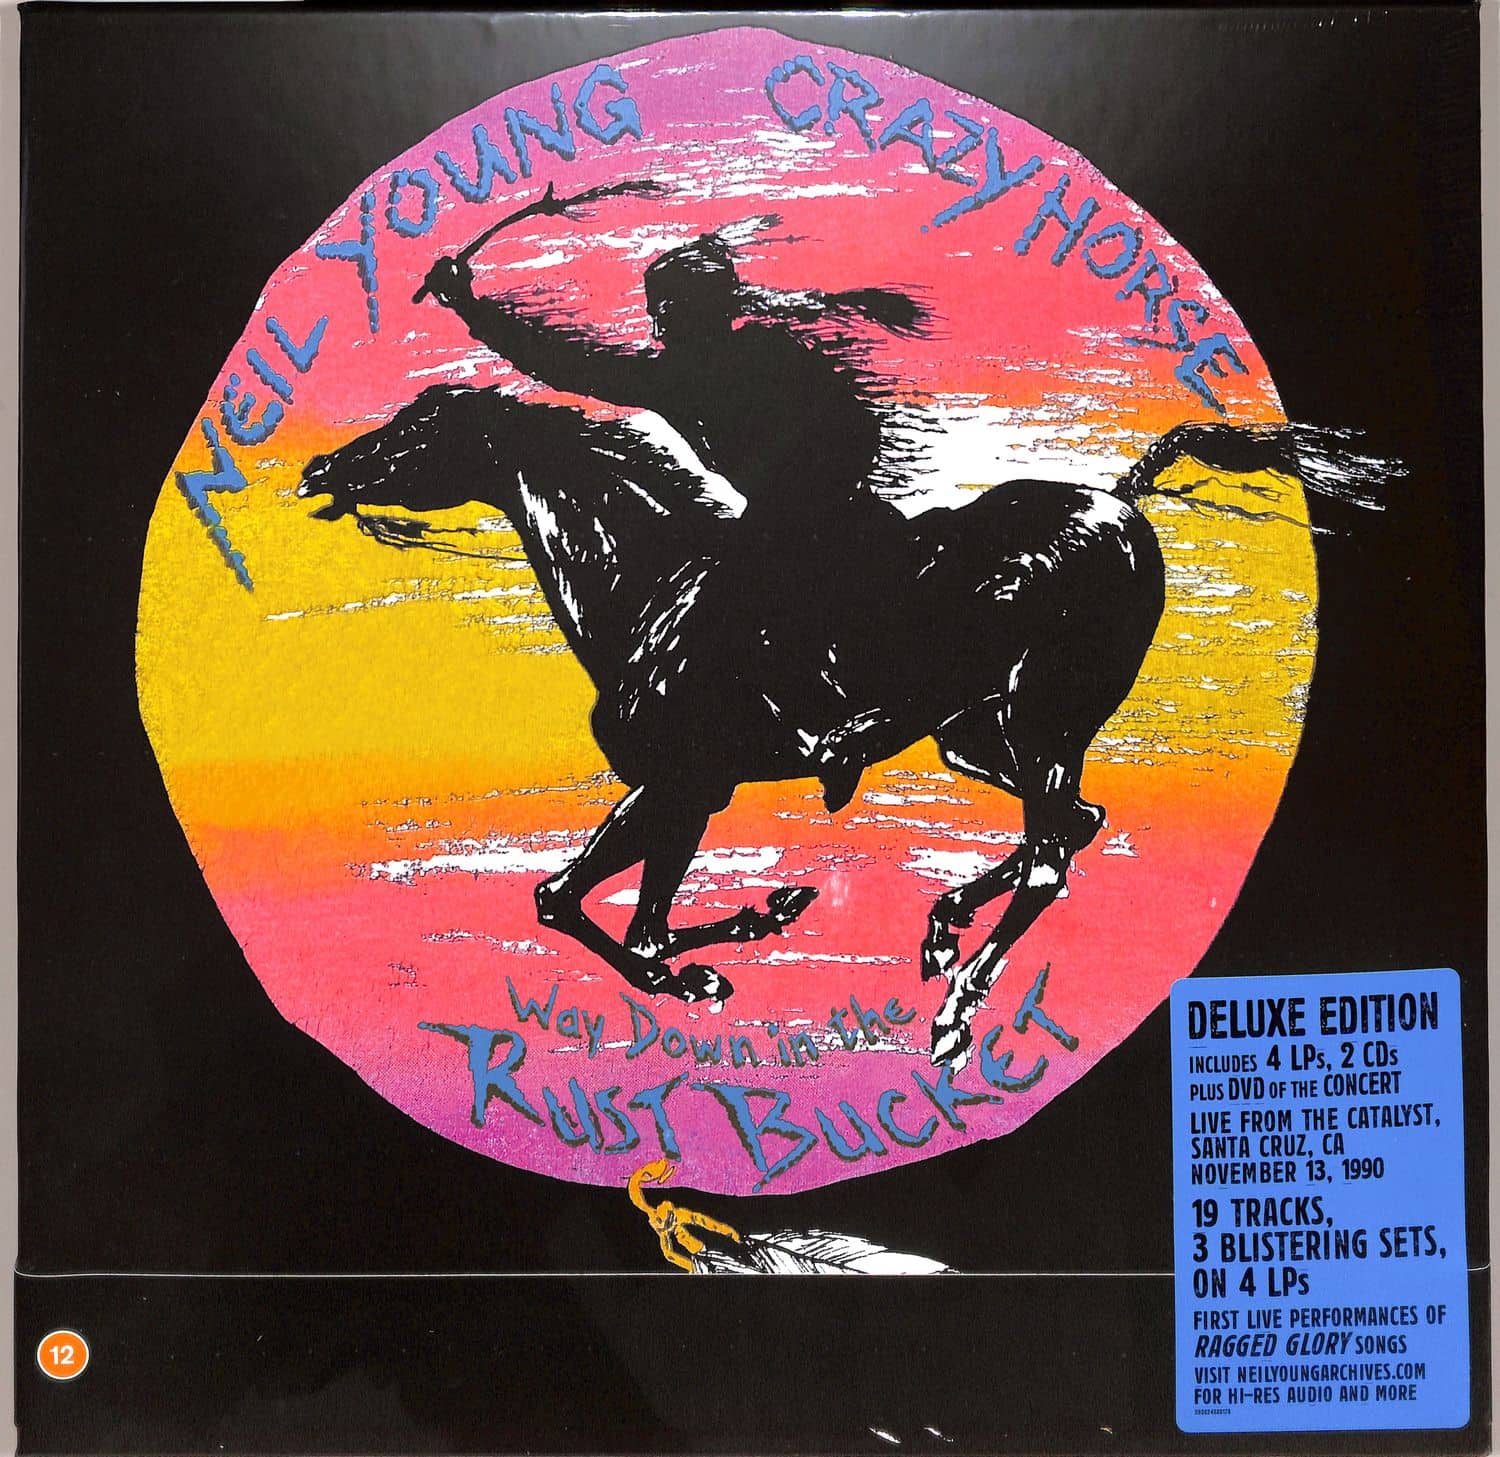 Neil Young & Crazy Horse - WAY DOWN IN THE RUST BUCKET 